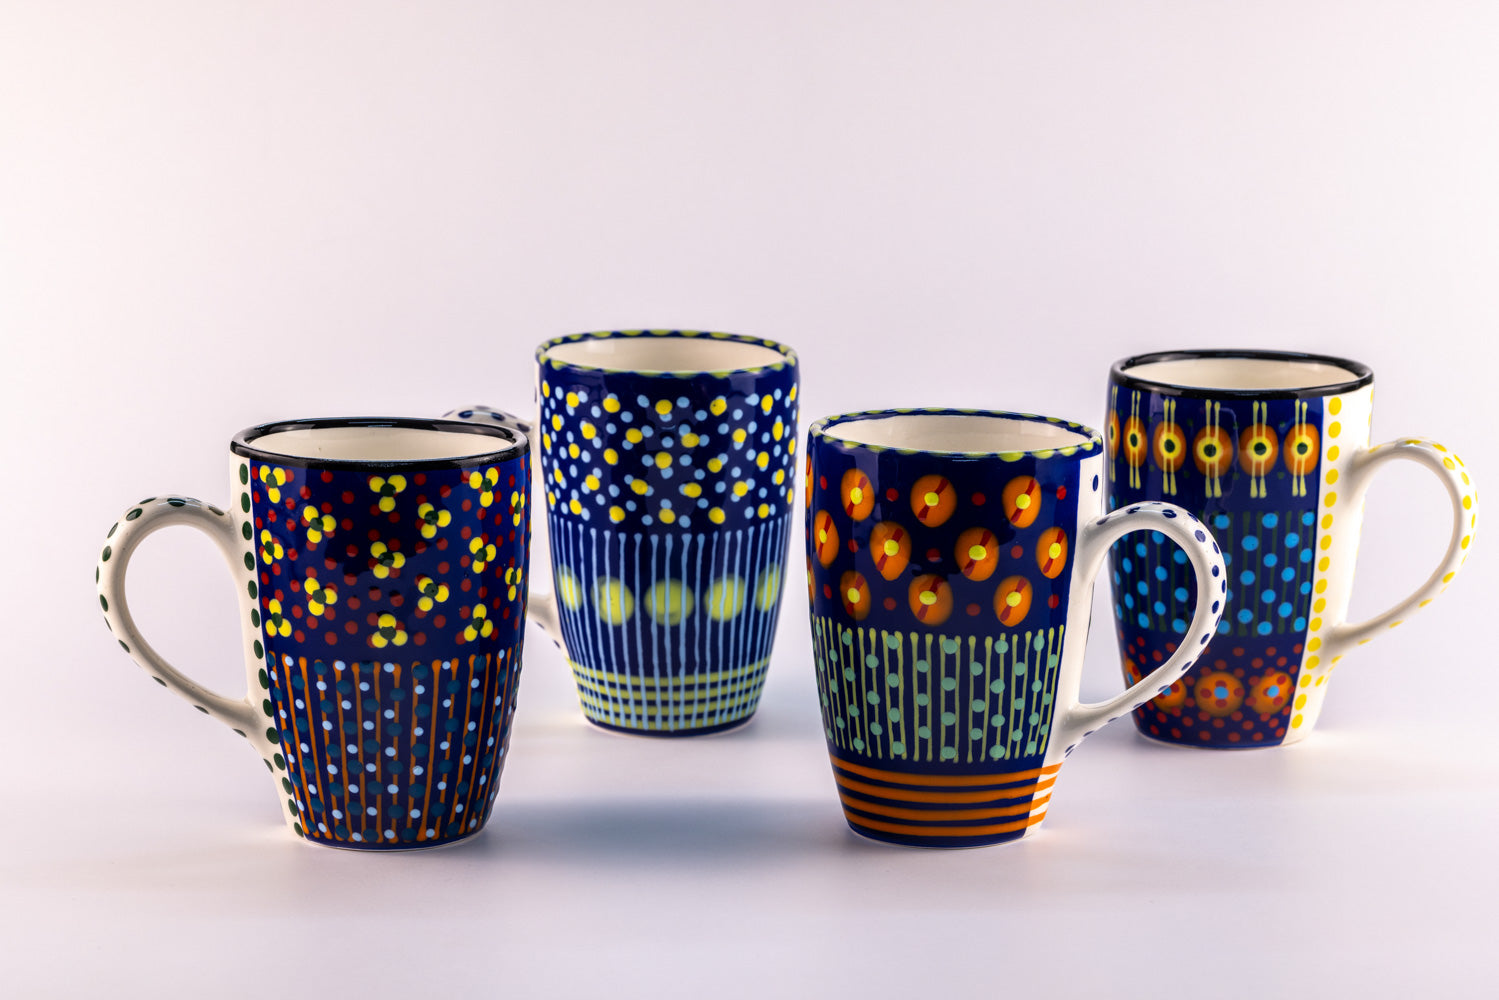 4 Colorful coffee mugs with Indigo Blue base color. Topped with dots & stripes in turquoise, orange, green, light blue, and yellow. Lovely!